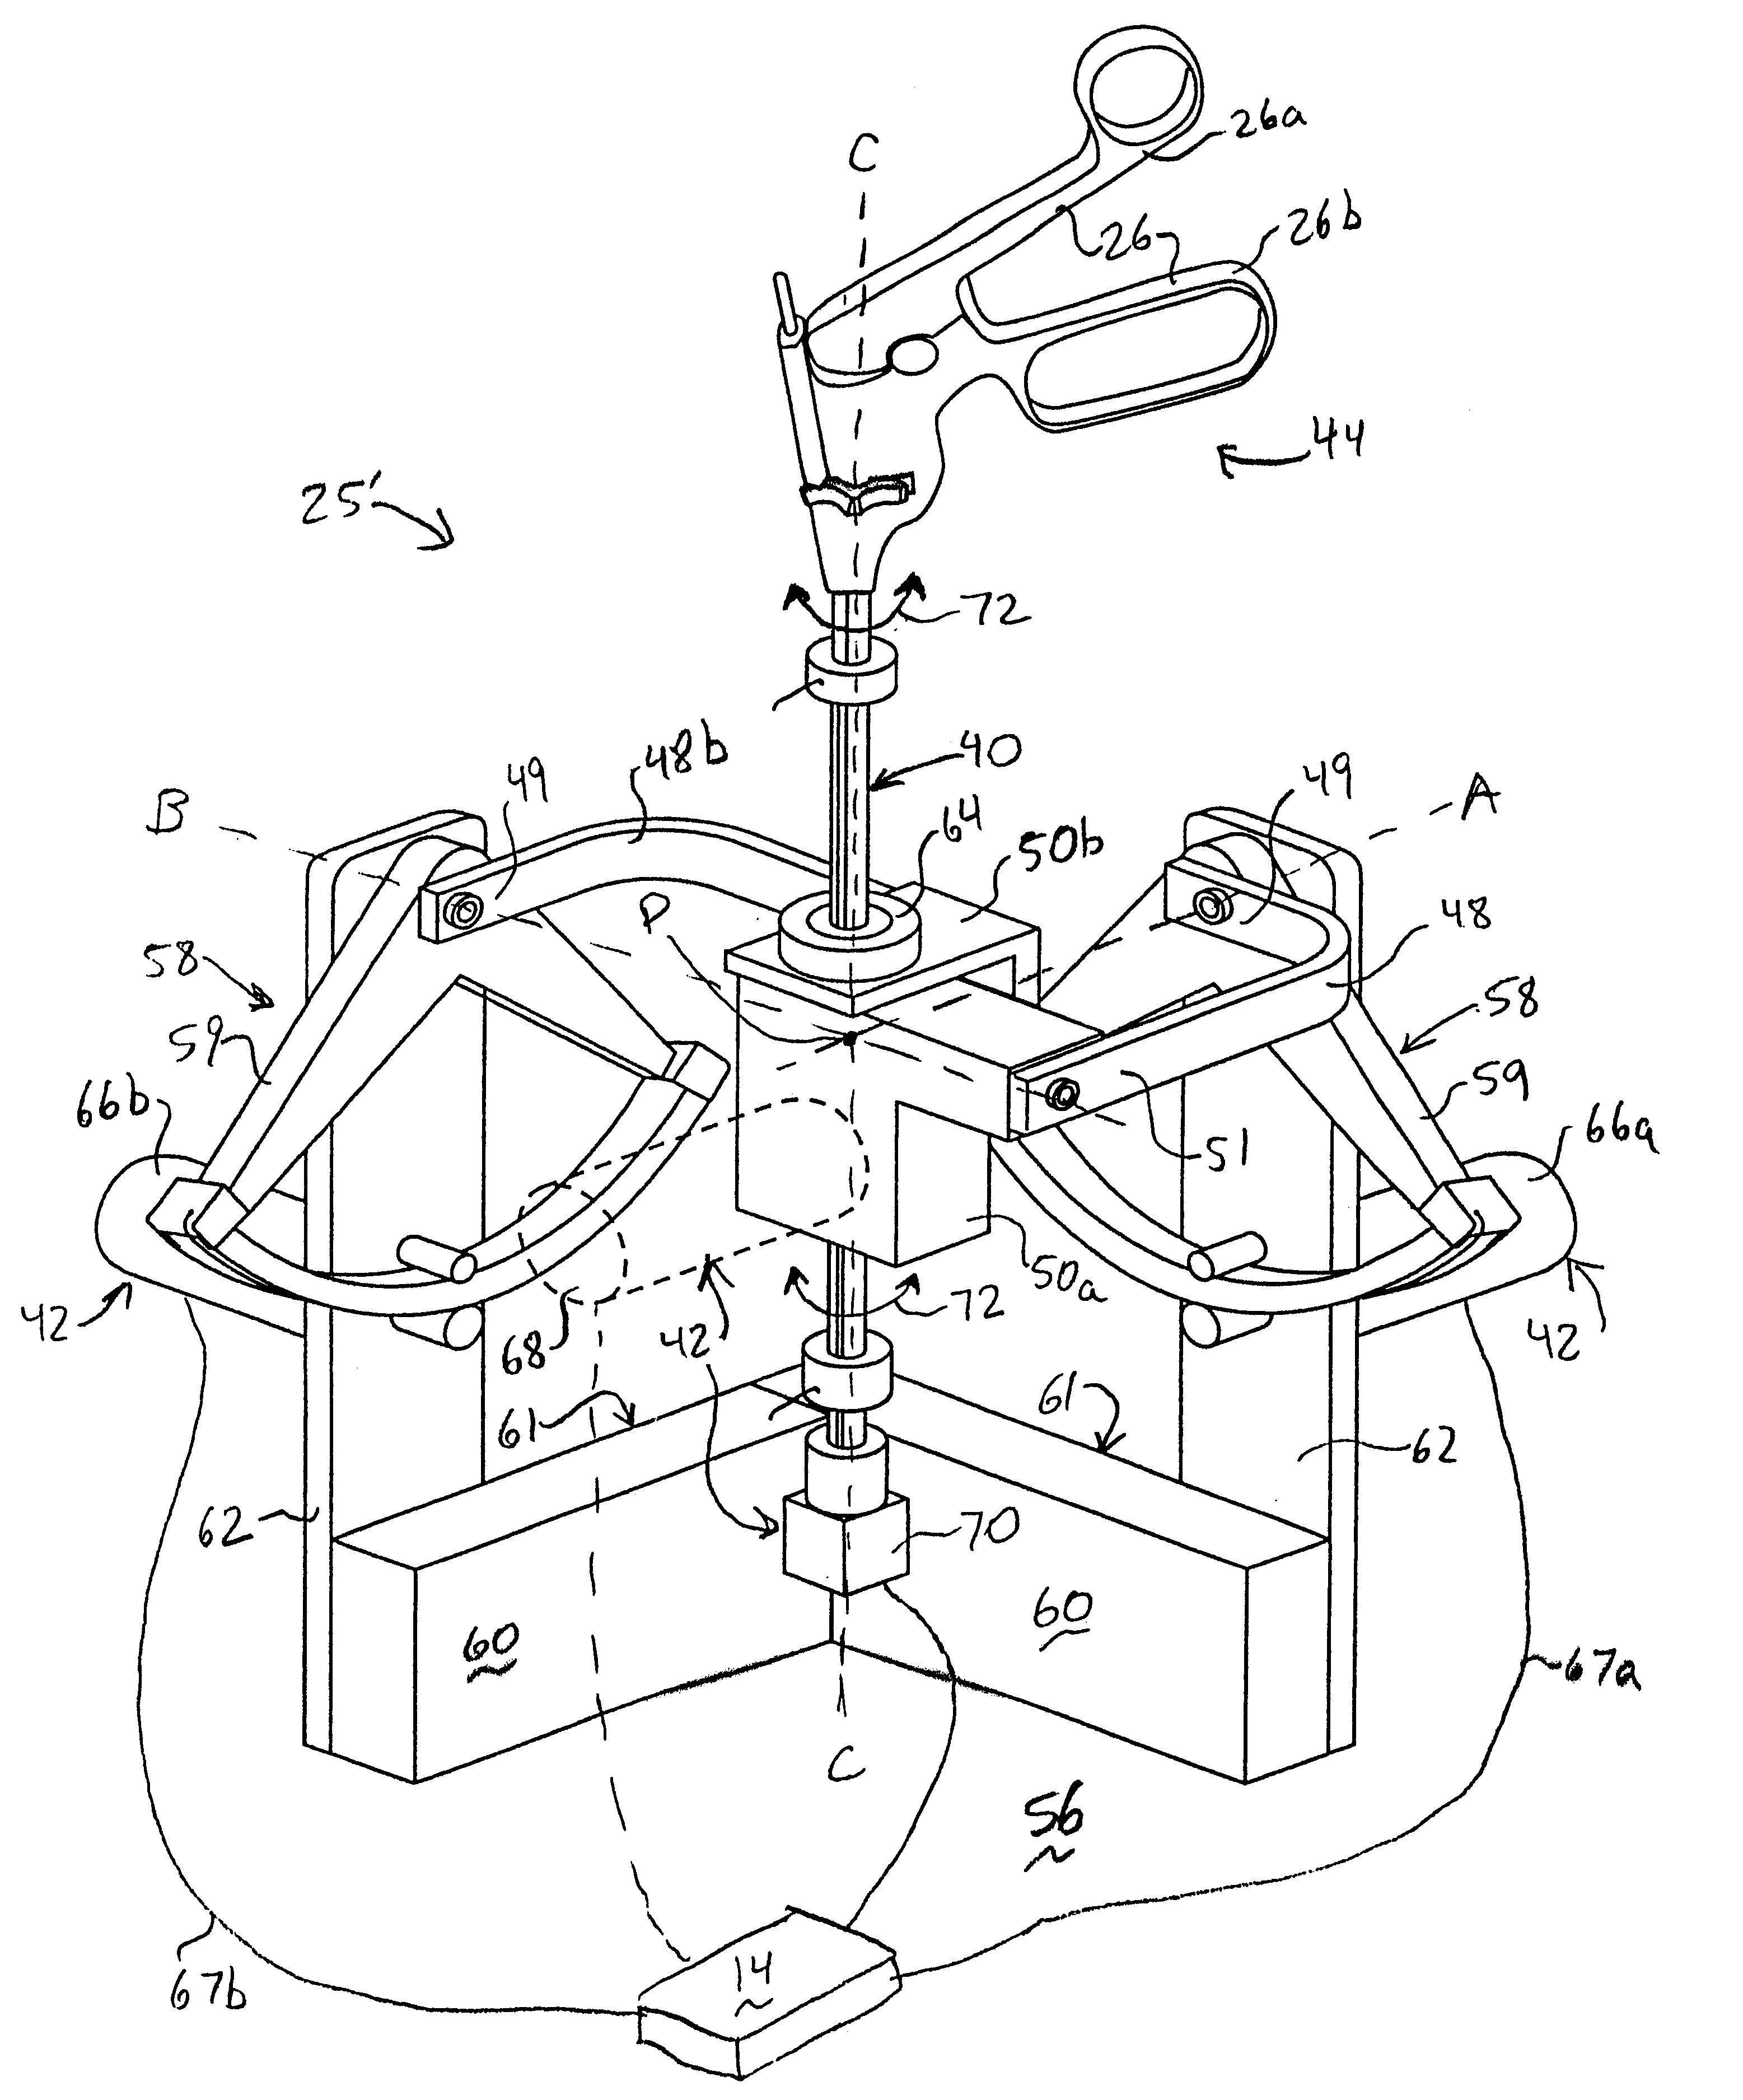 Passive force feedback for computer interface devices